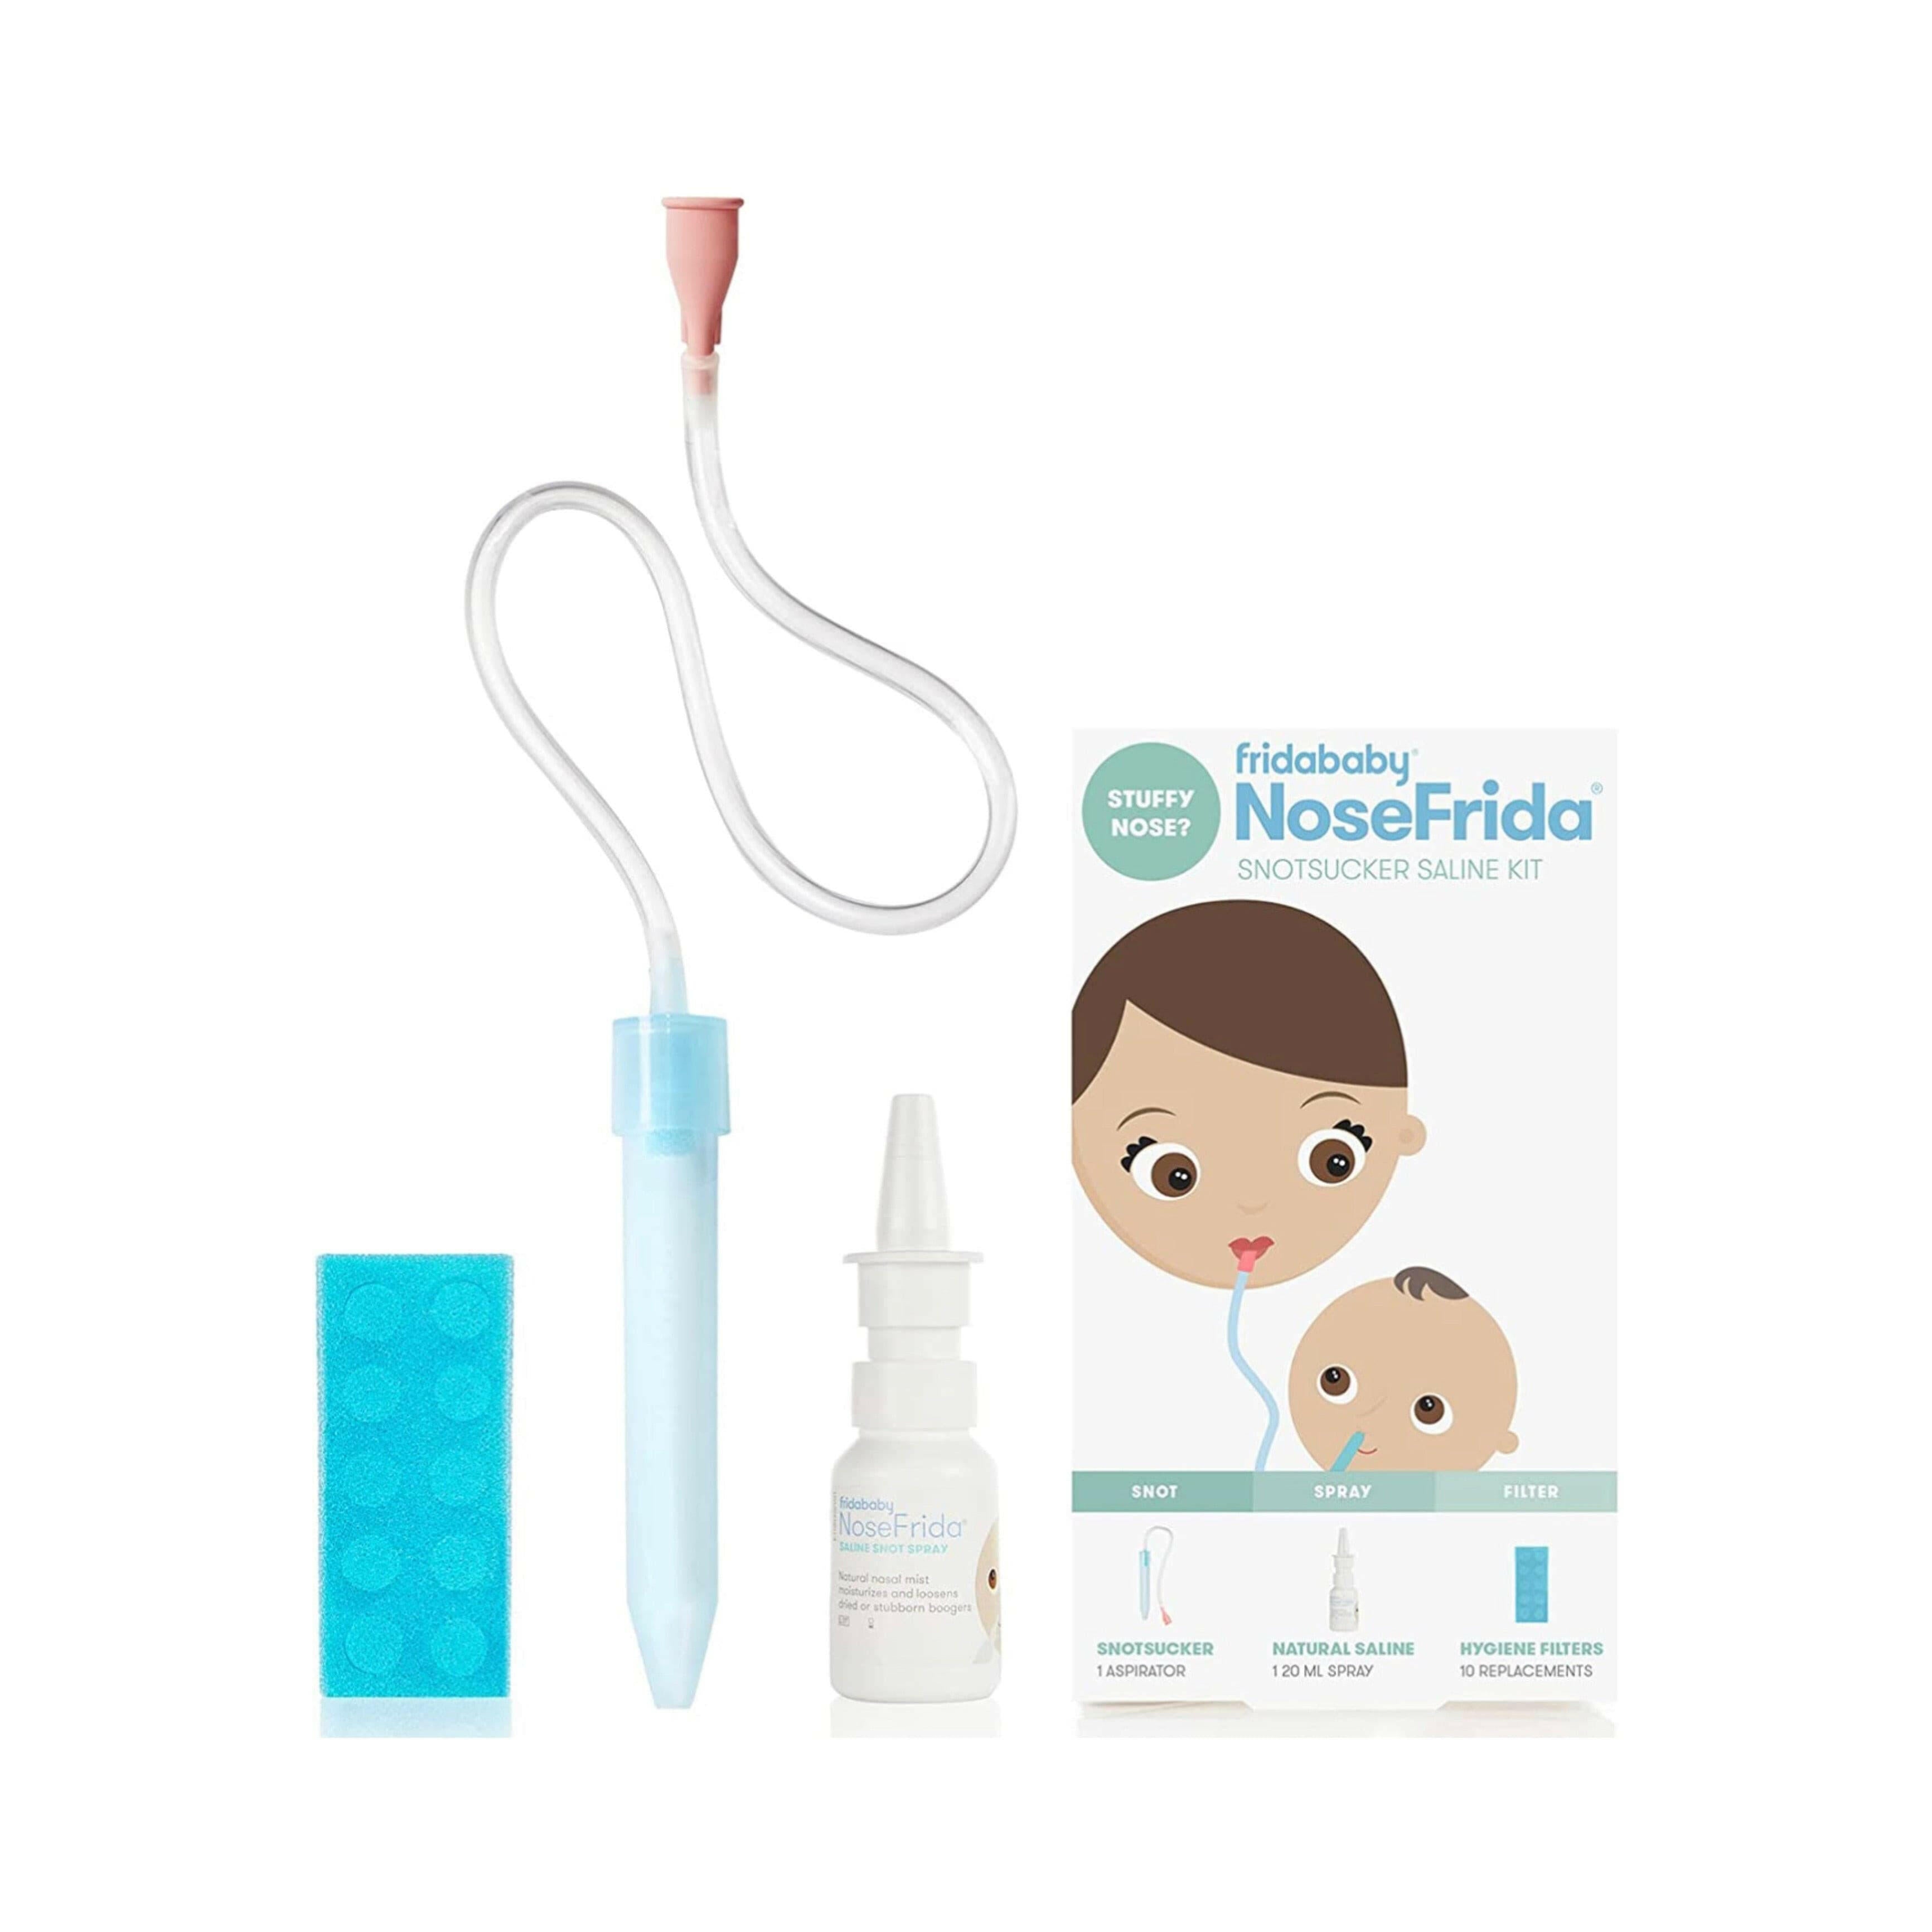 Baby Nasal Aspirator with 10 Extra Filters and All-Natural Saline Nasal Spray by Frida Baby.